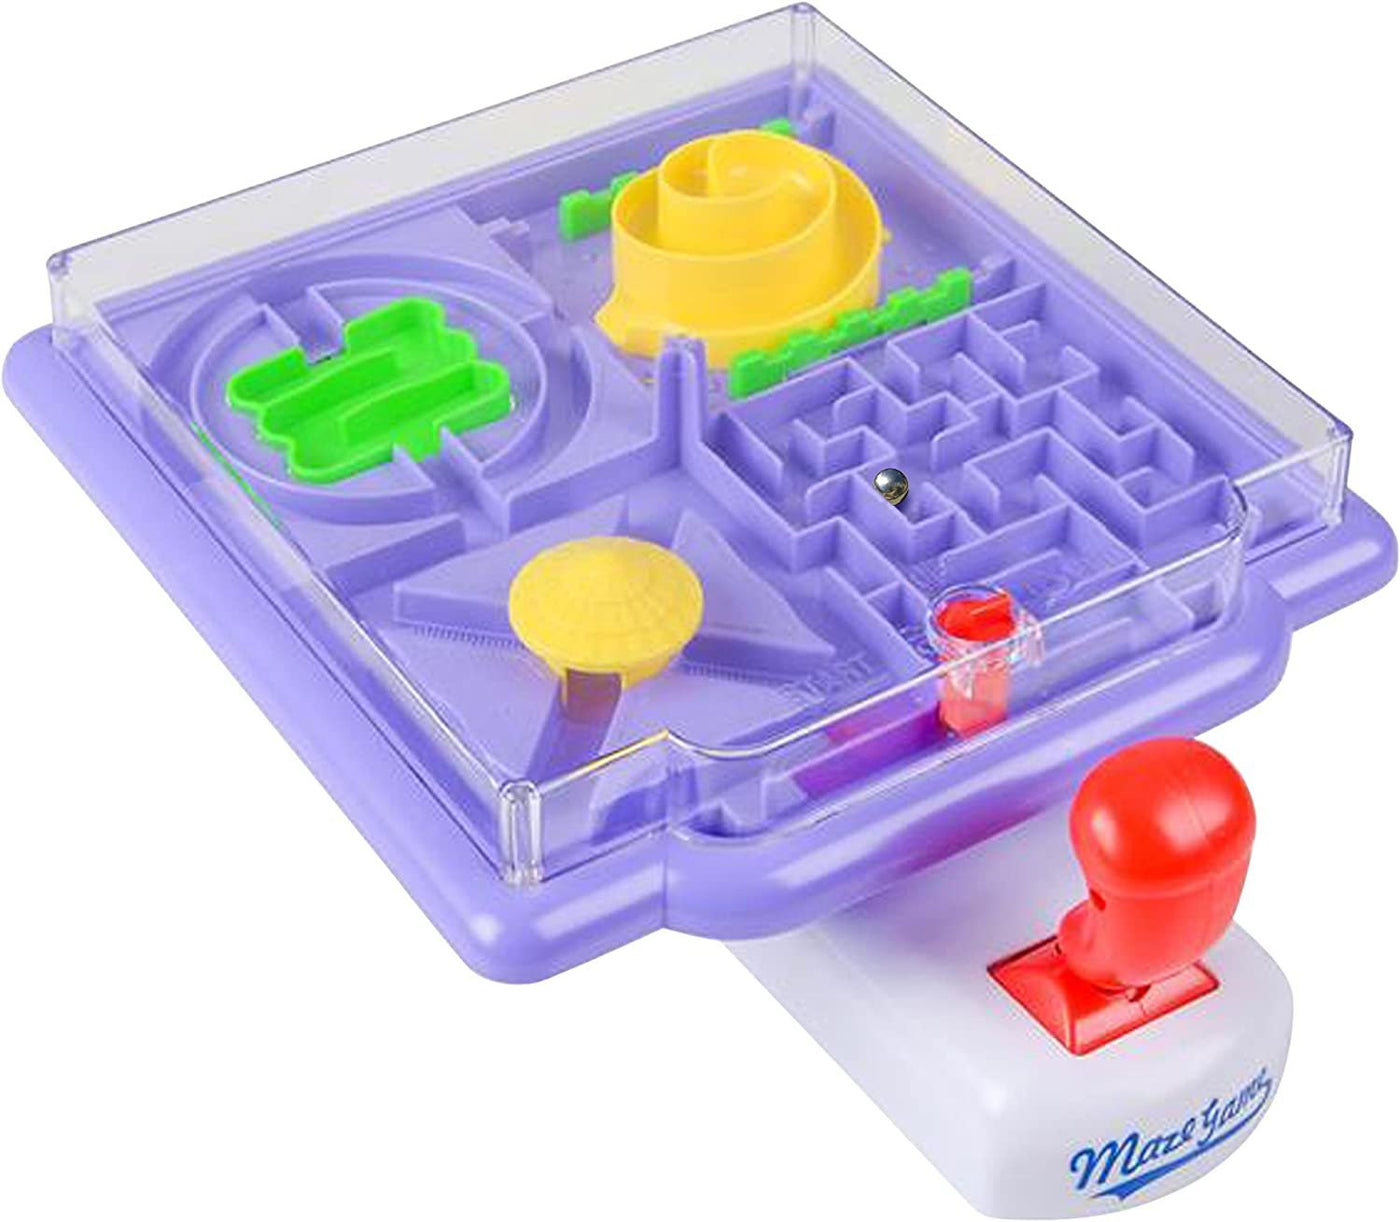 Tilt Maze Game by Gamieac, 4 in 1 Mazes with Tilting Joystick - Bonus 'I'm a Gamieac' Challenge - Super Fun Puzzle Labyrinth Maze Game for Kids and Adults - Educative Toy for Focus and Motor Skills